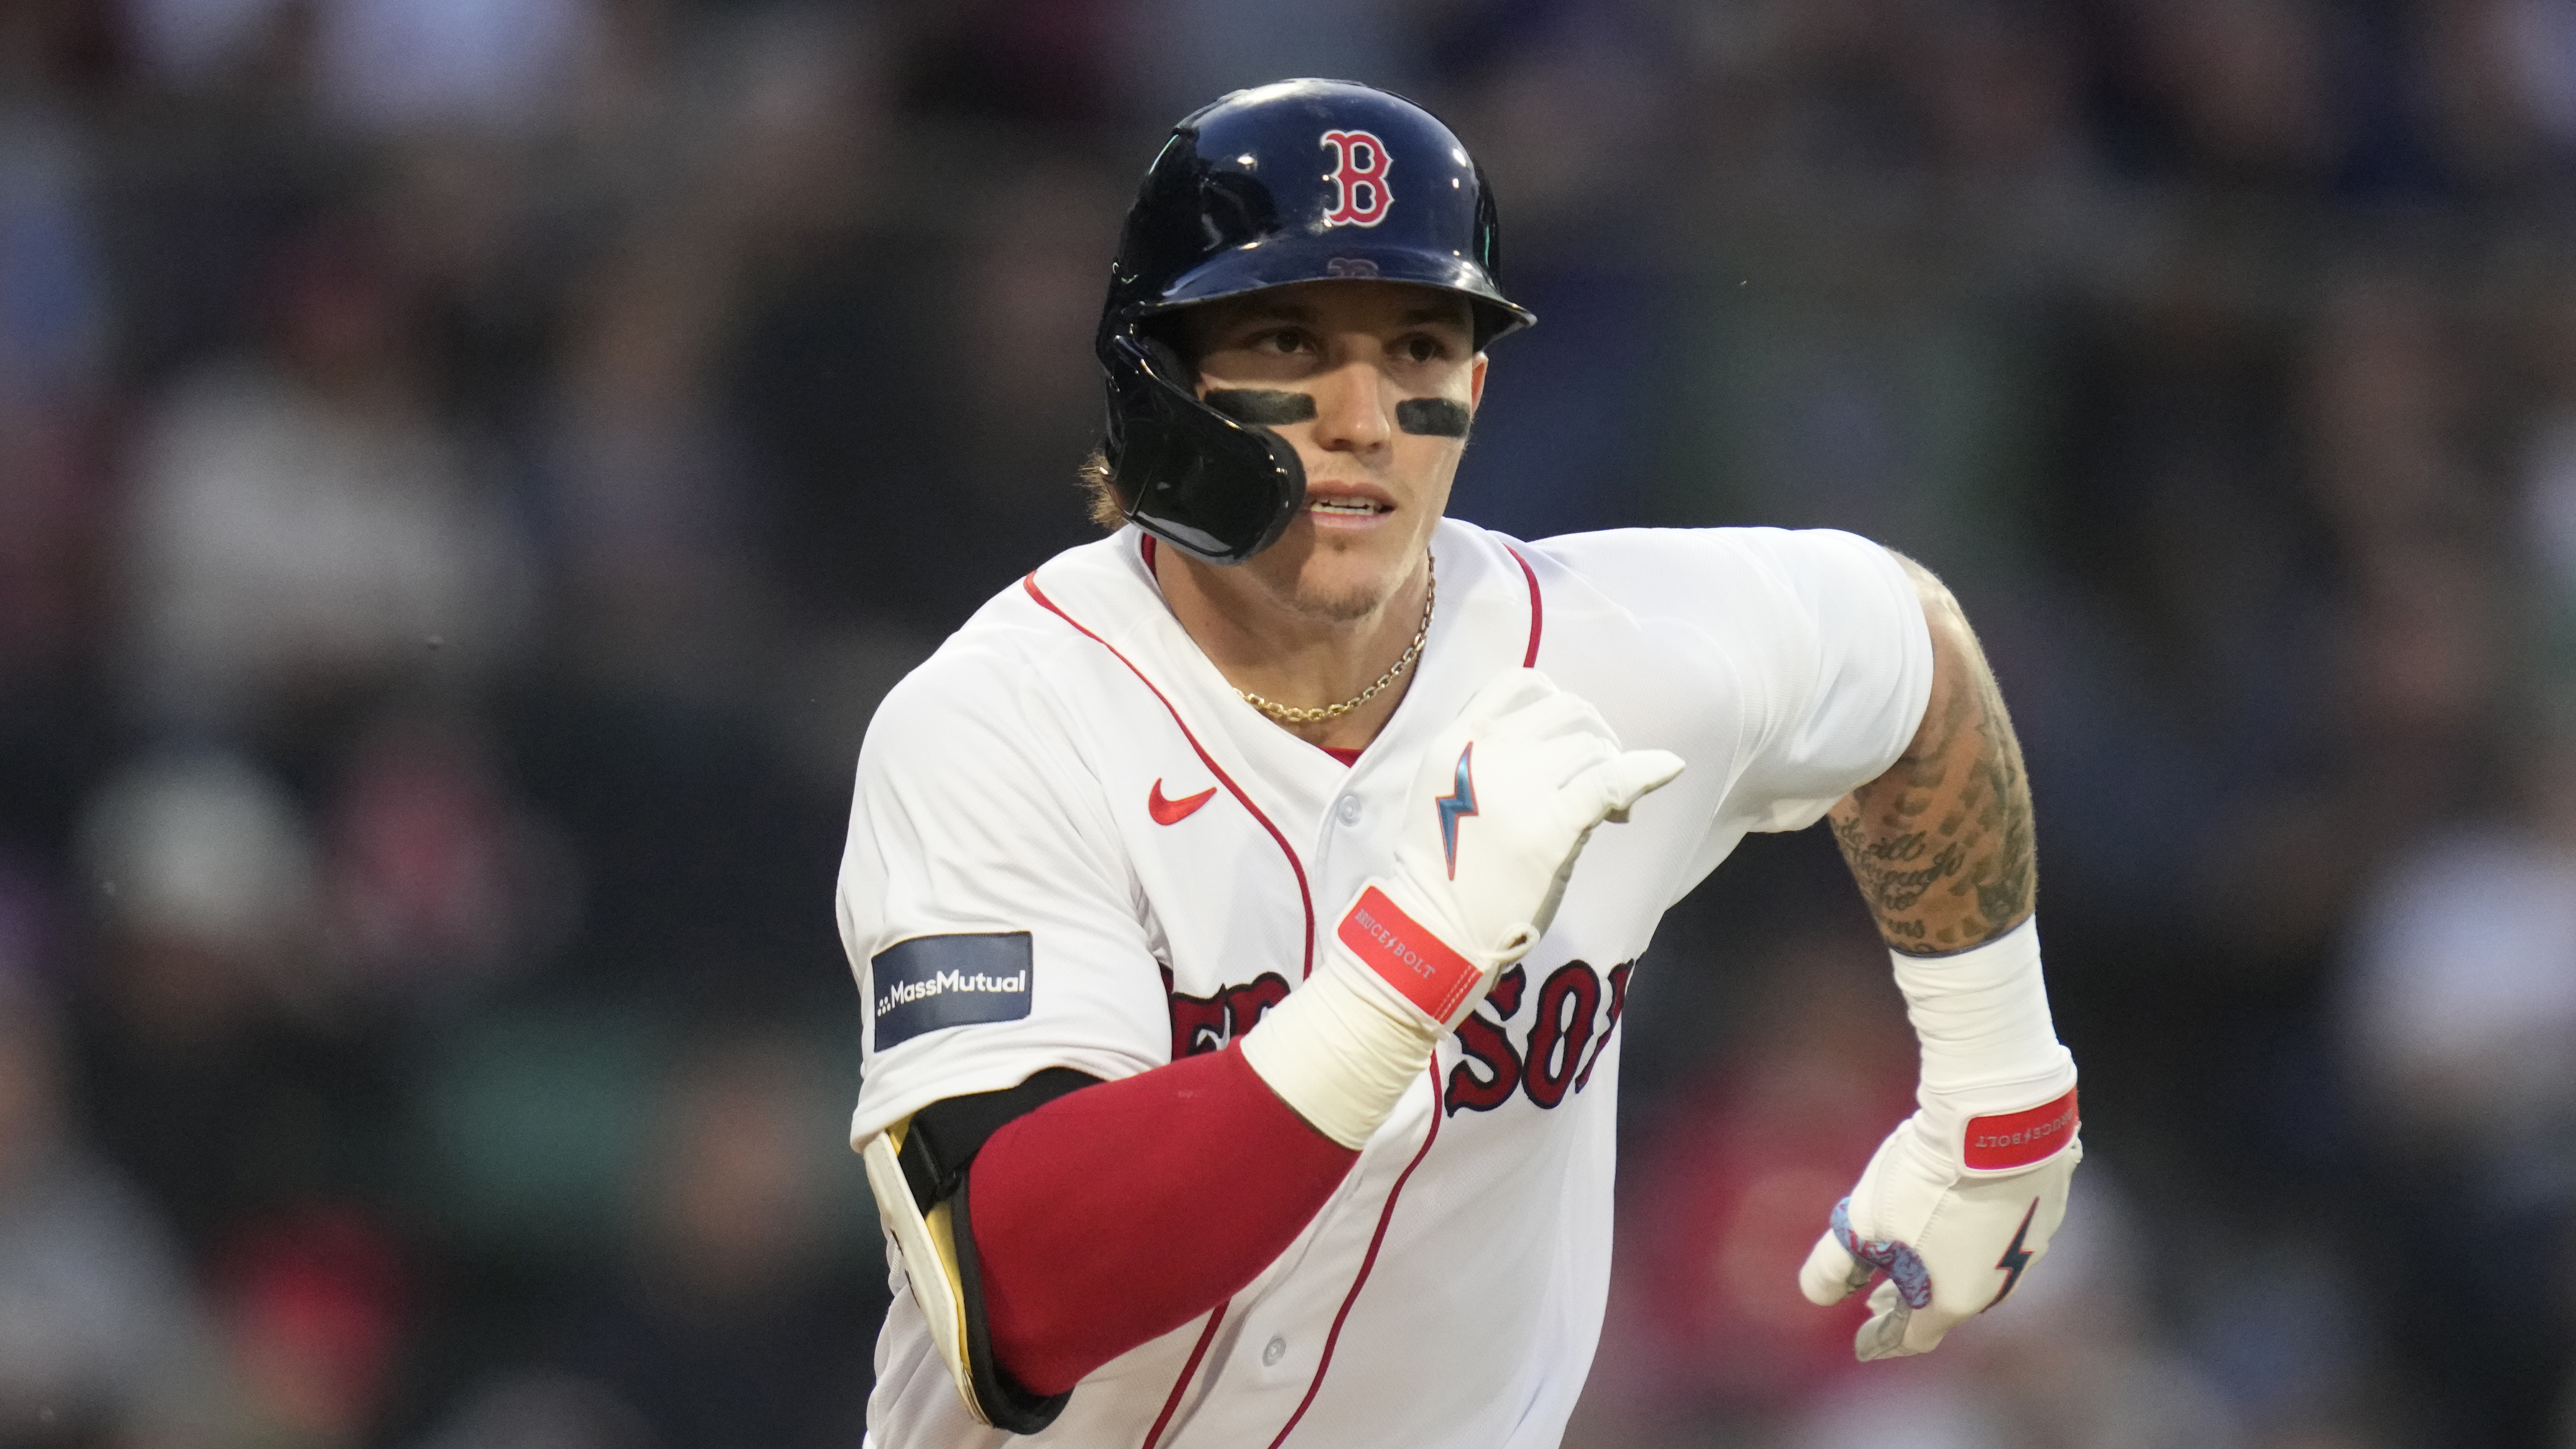 Jarren Duran is clearly an impact player for the Red Sox, but how